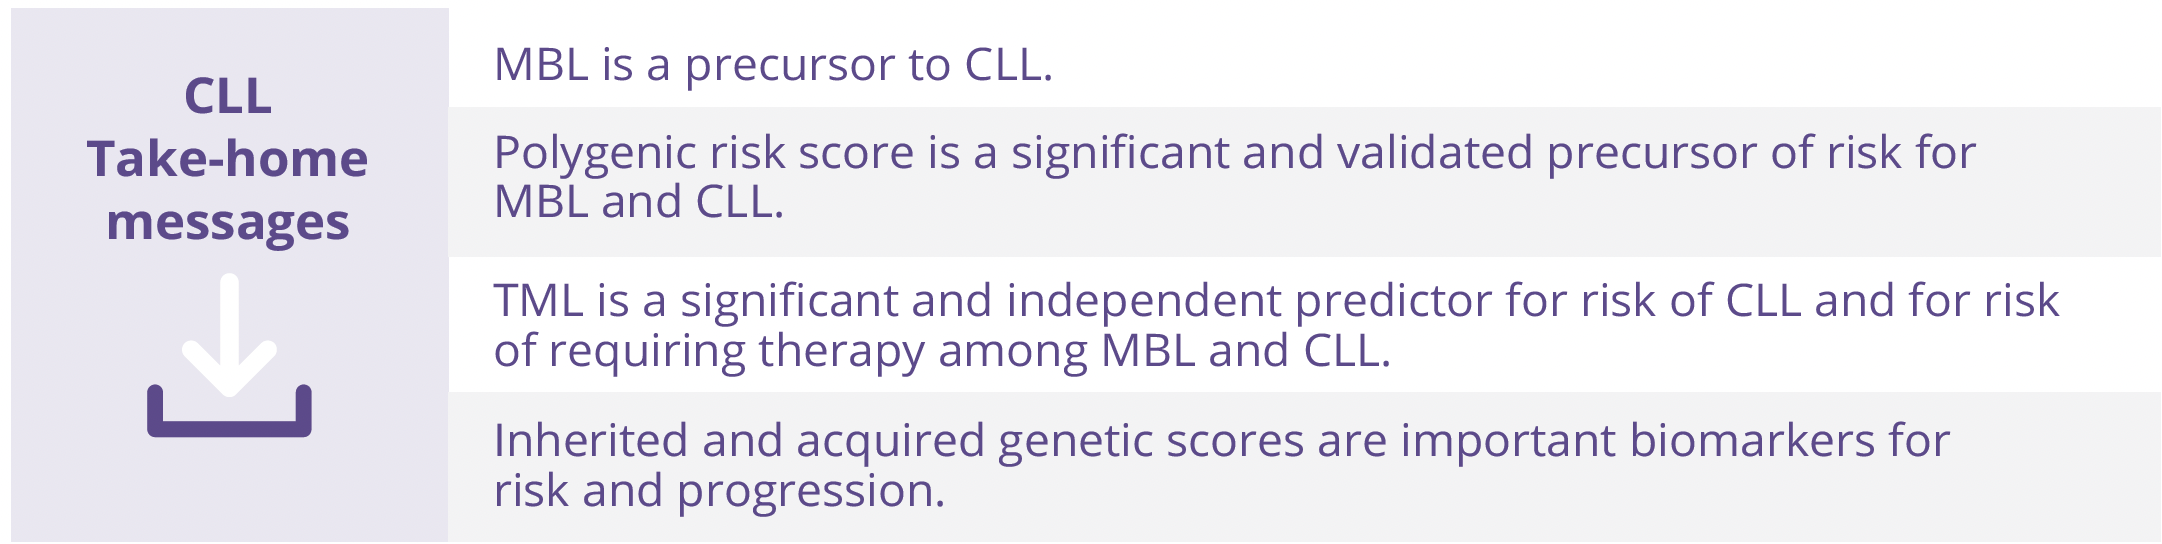 CLL take-home messages